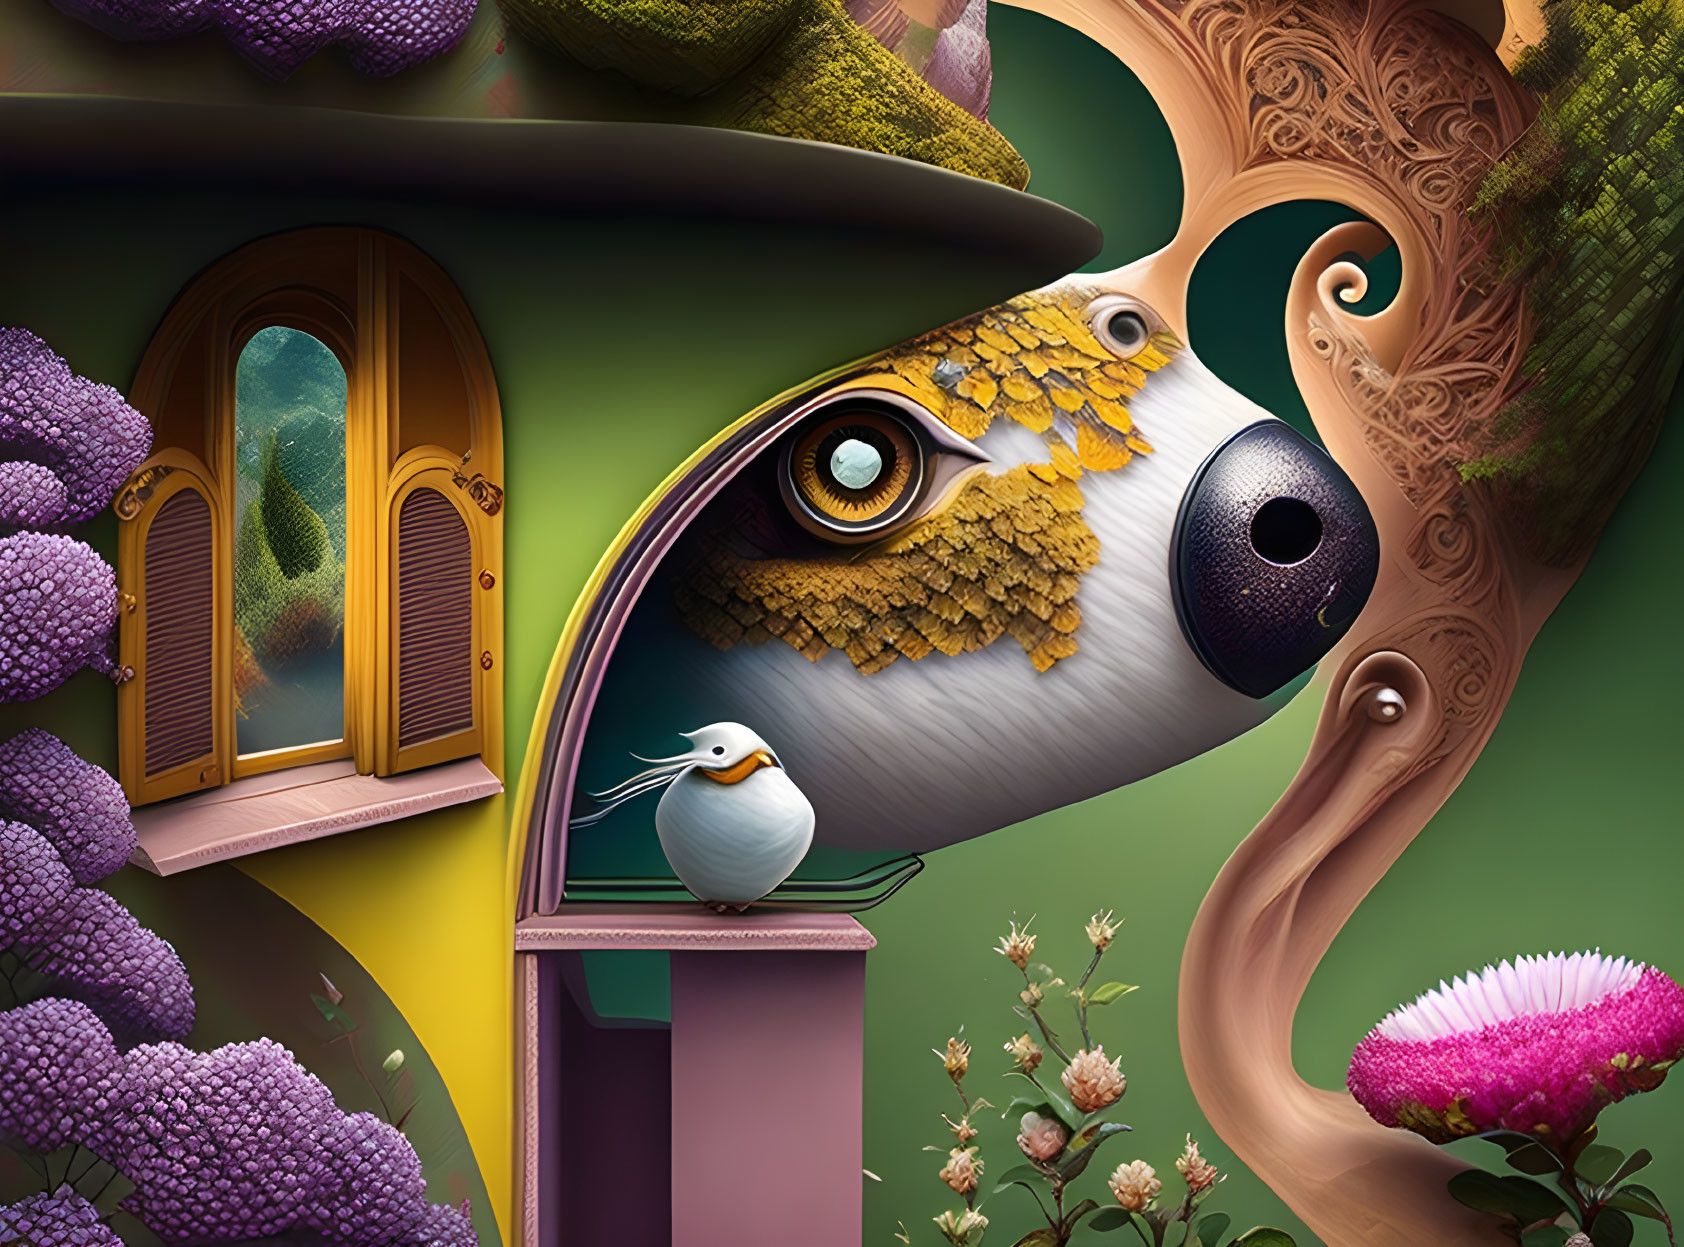 Surreal bird-themed artwork with forest view window and architectural elements